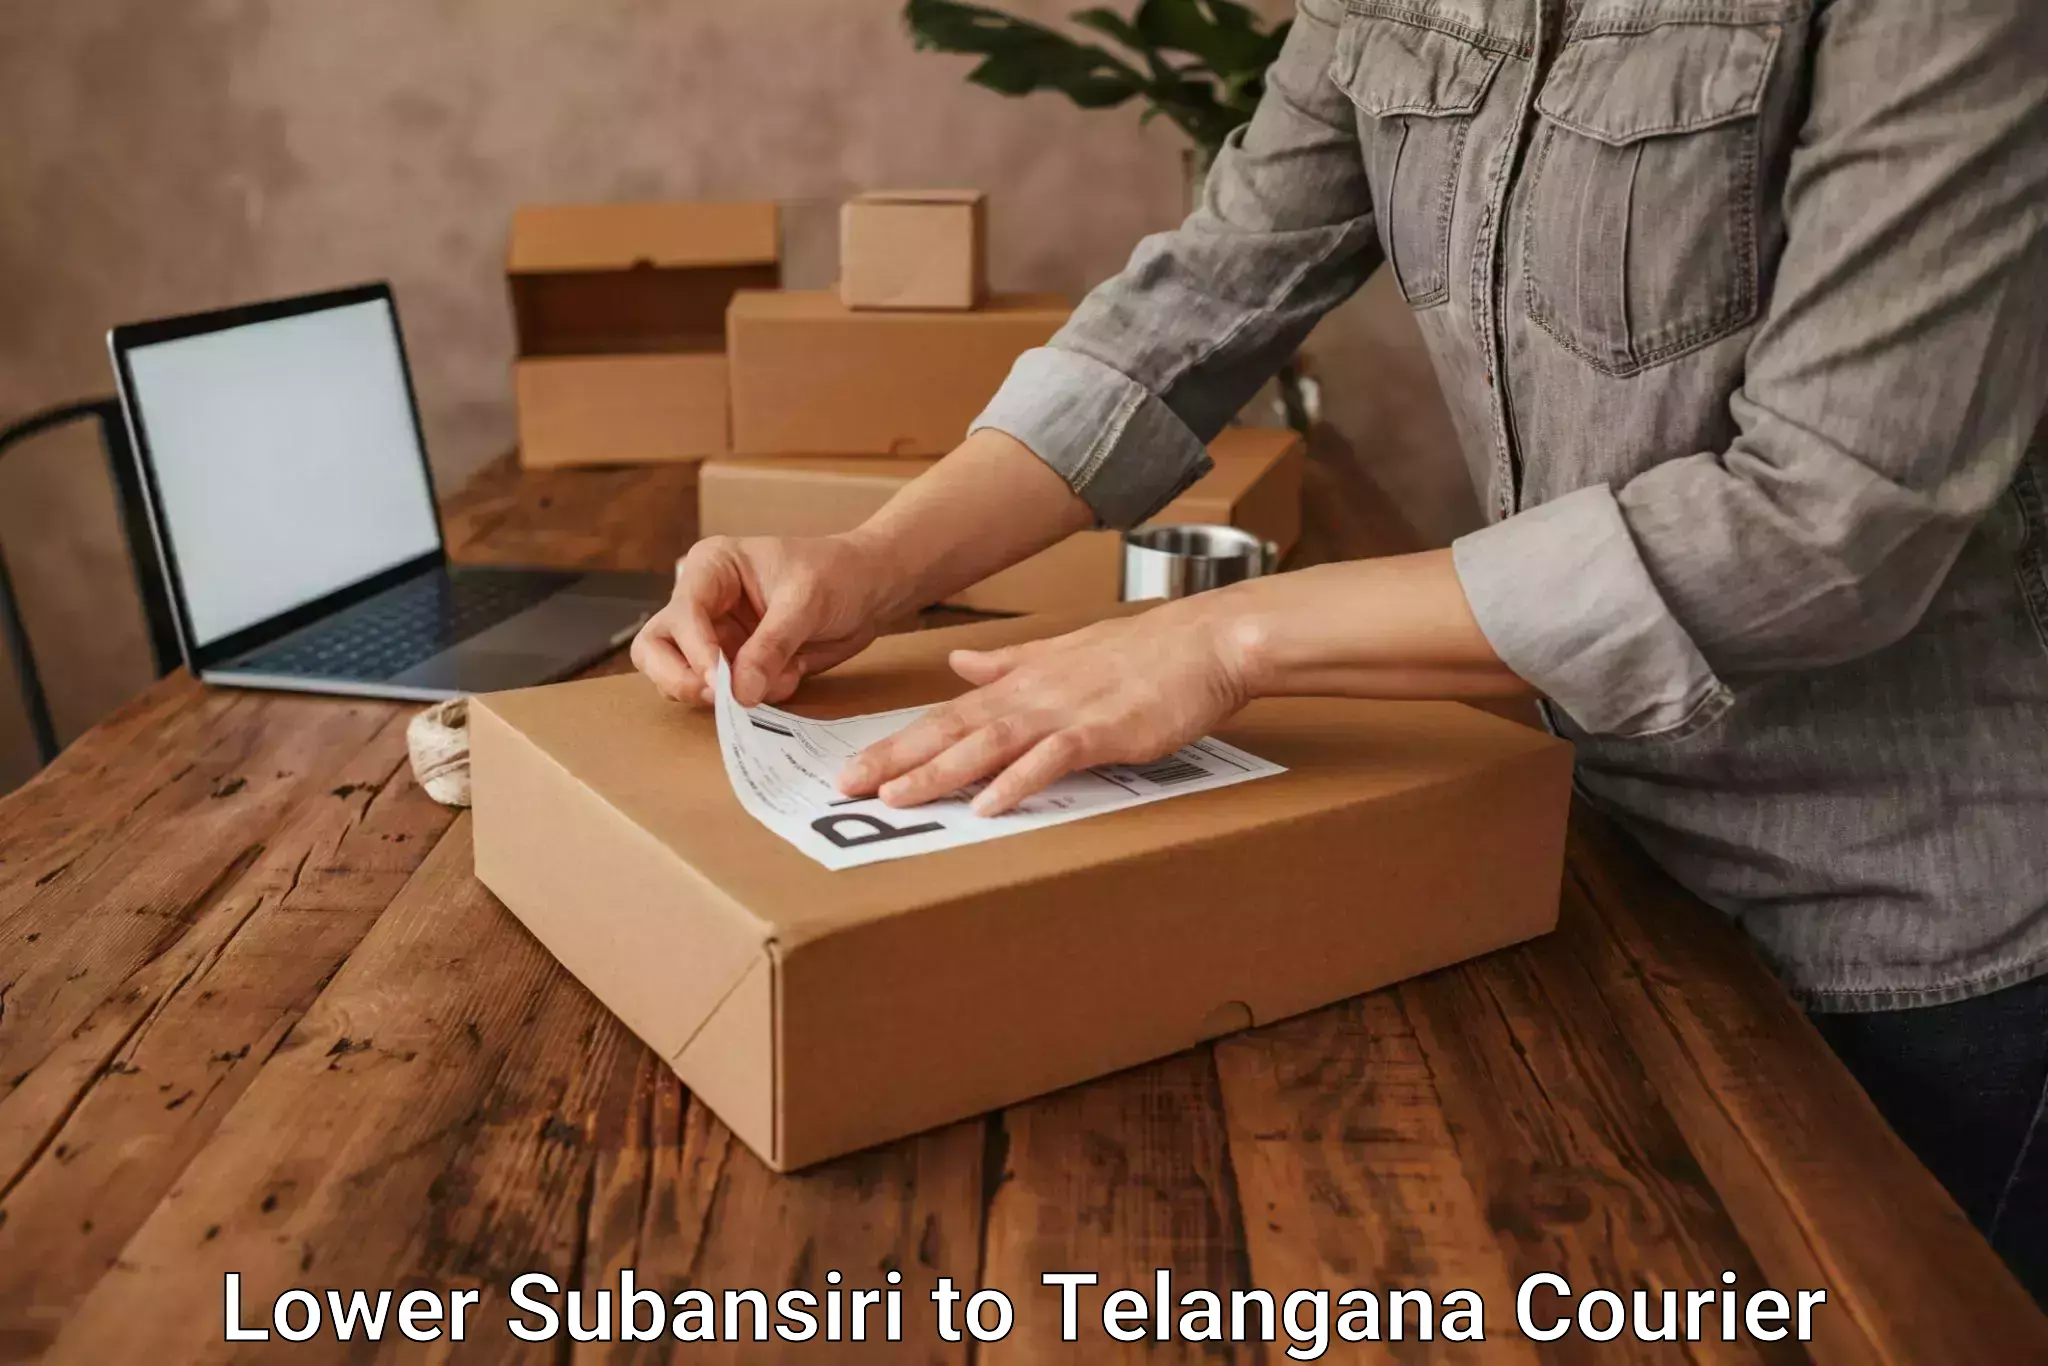 Fast shipping solutions Lower Subansiri to Trimulgherry